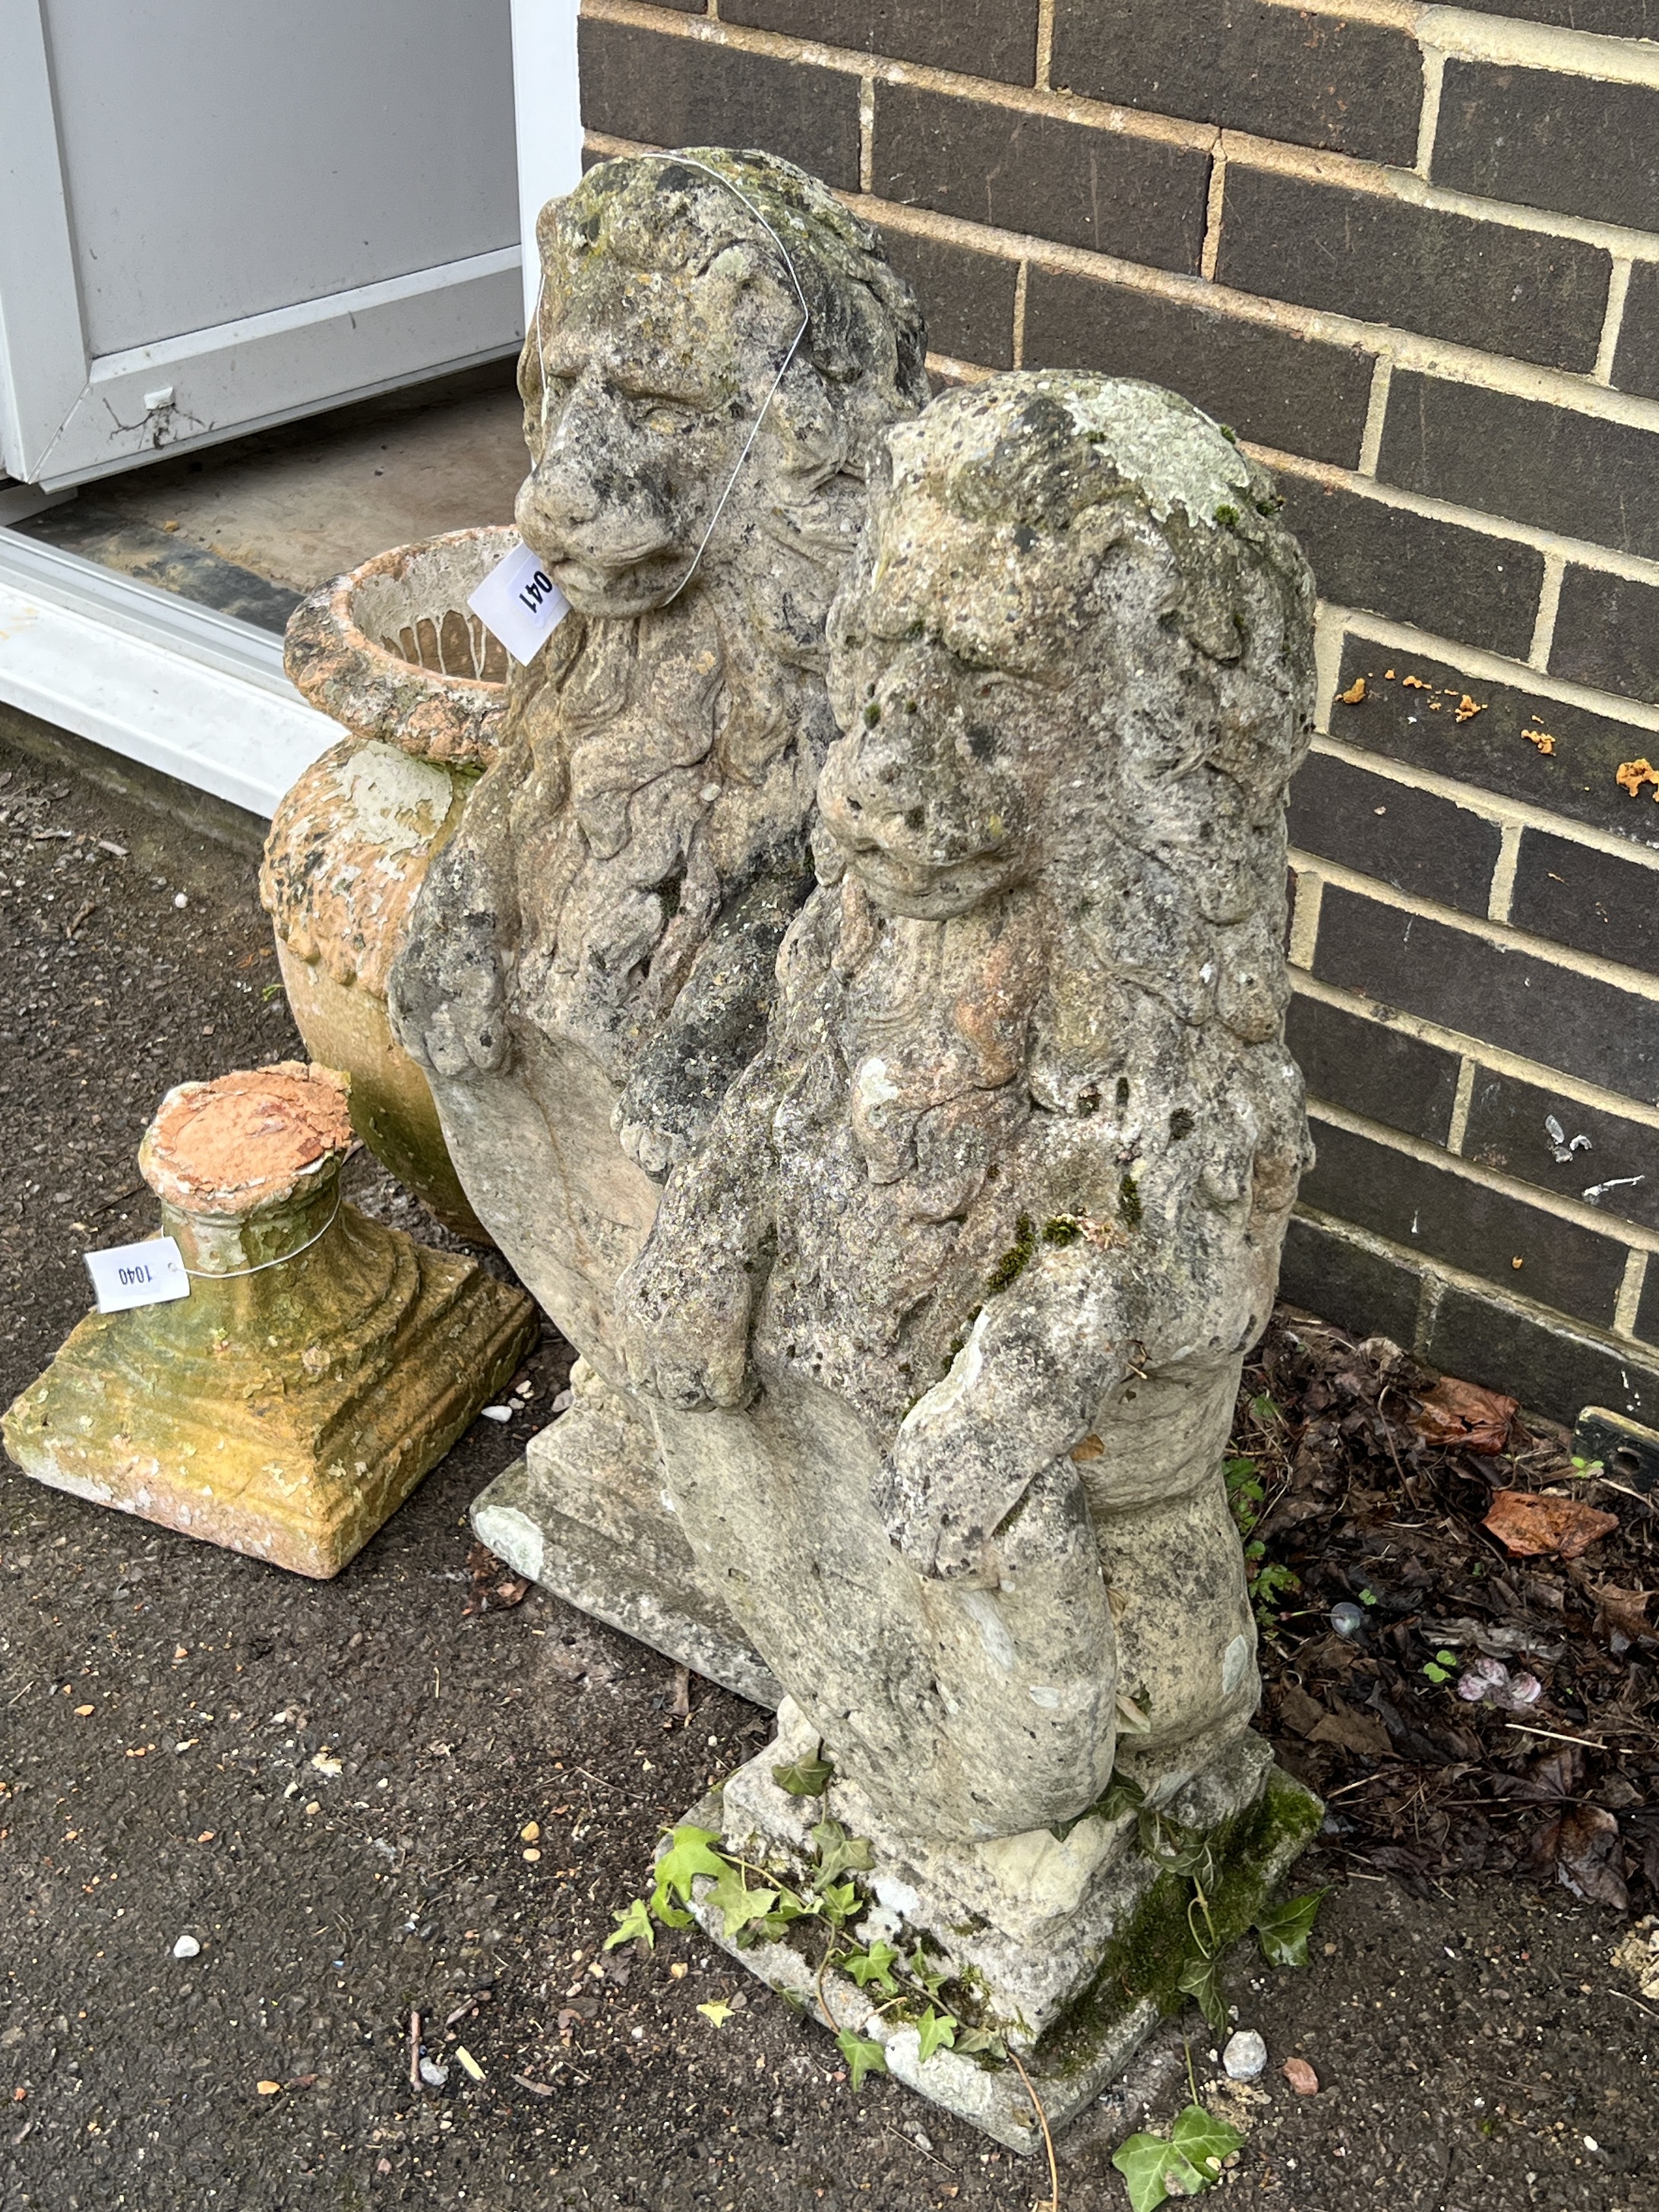 A pair of reconstituted stone heraldic lion garden ornaments, height 78cm